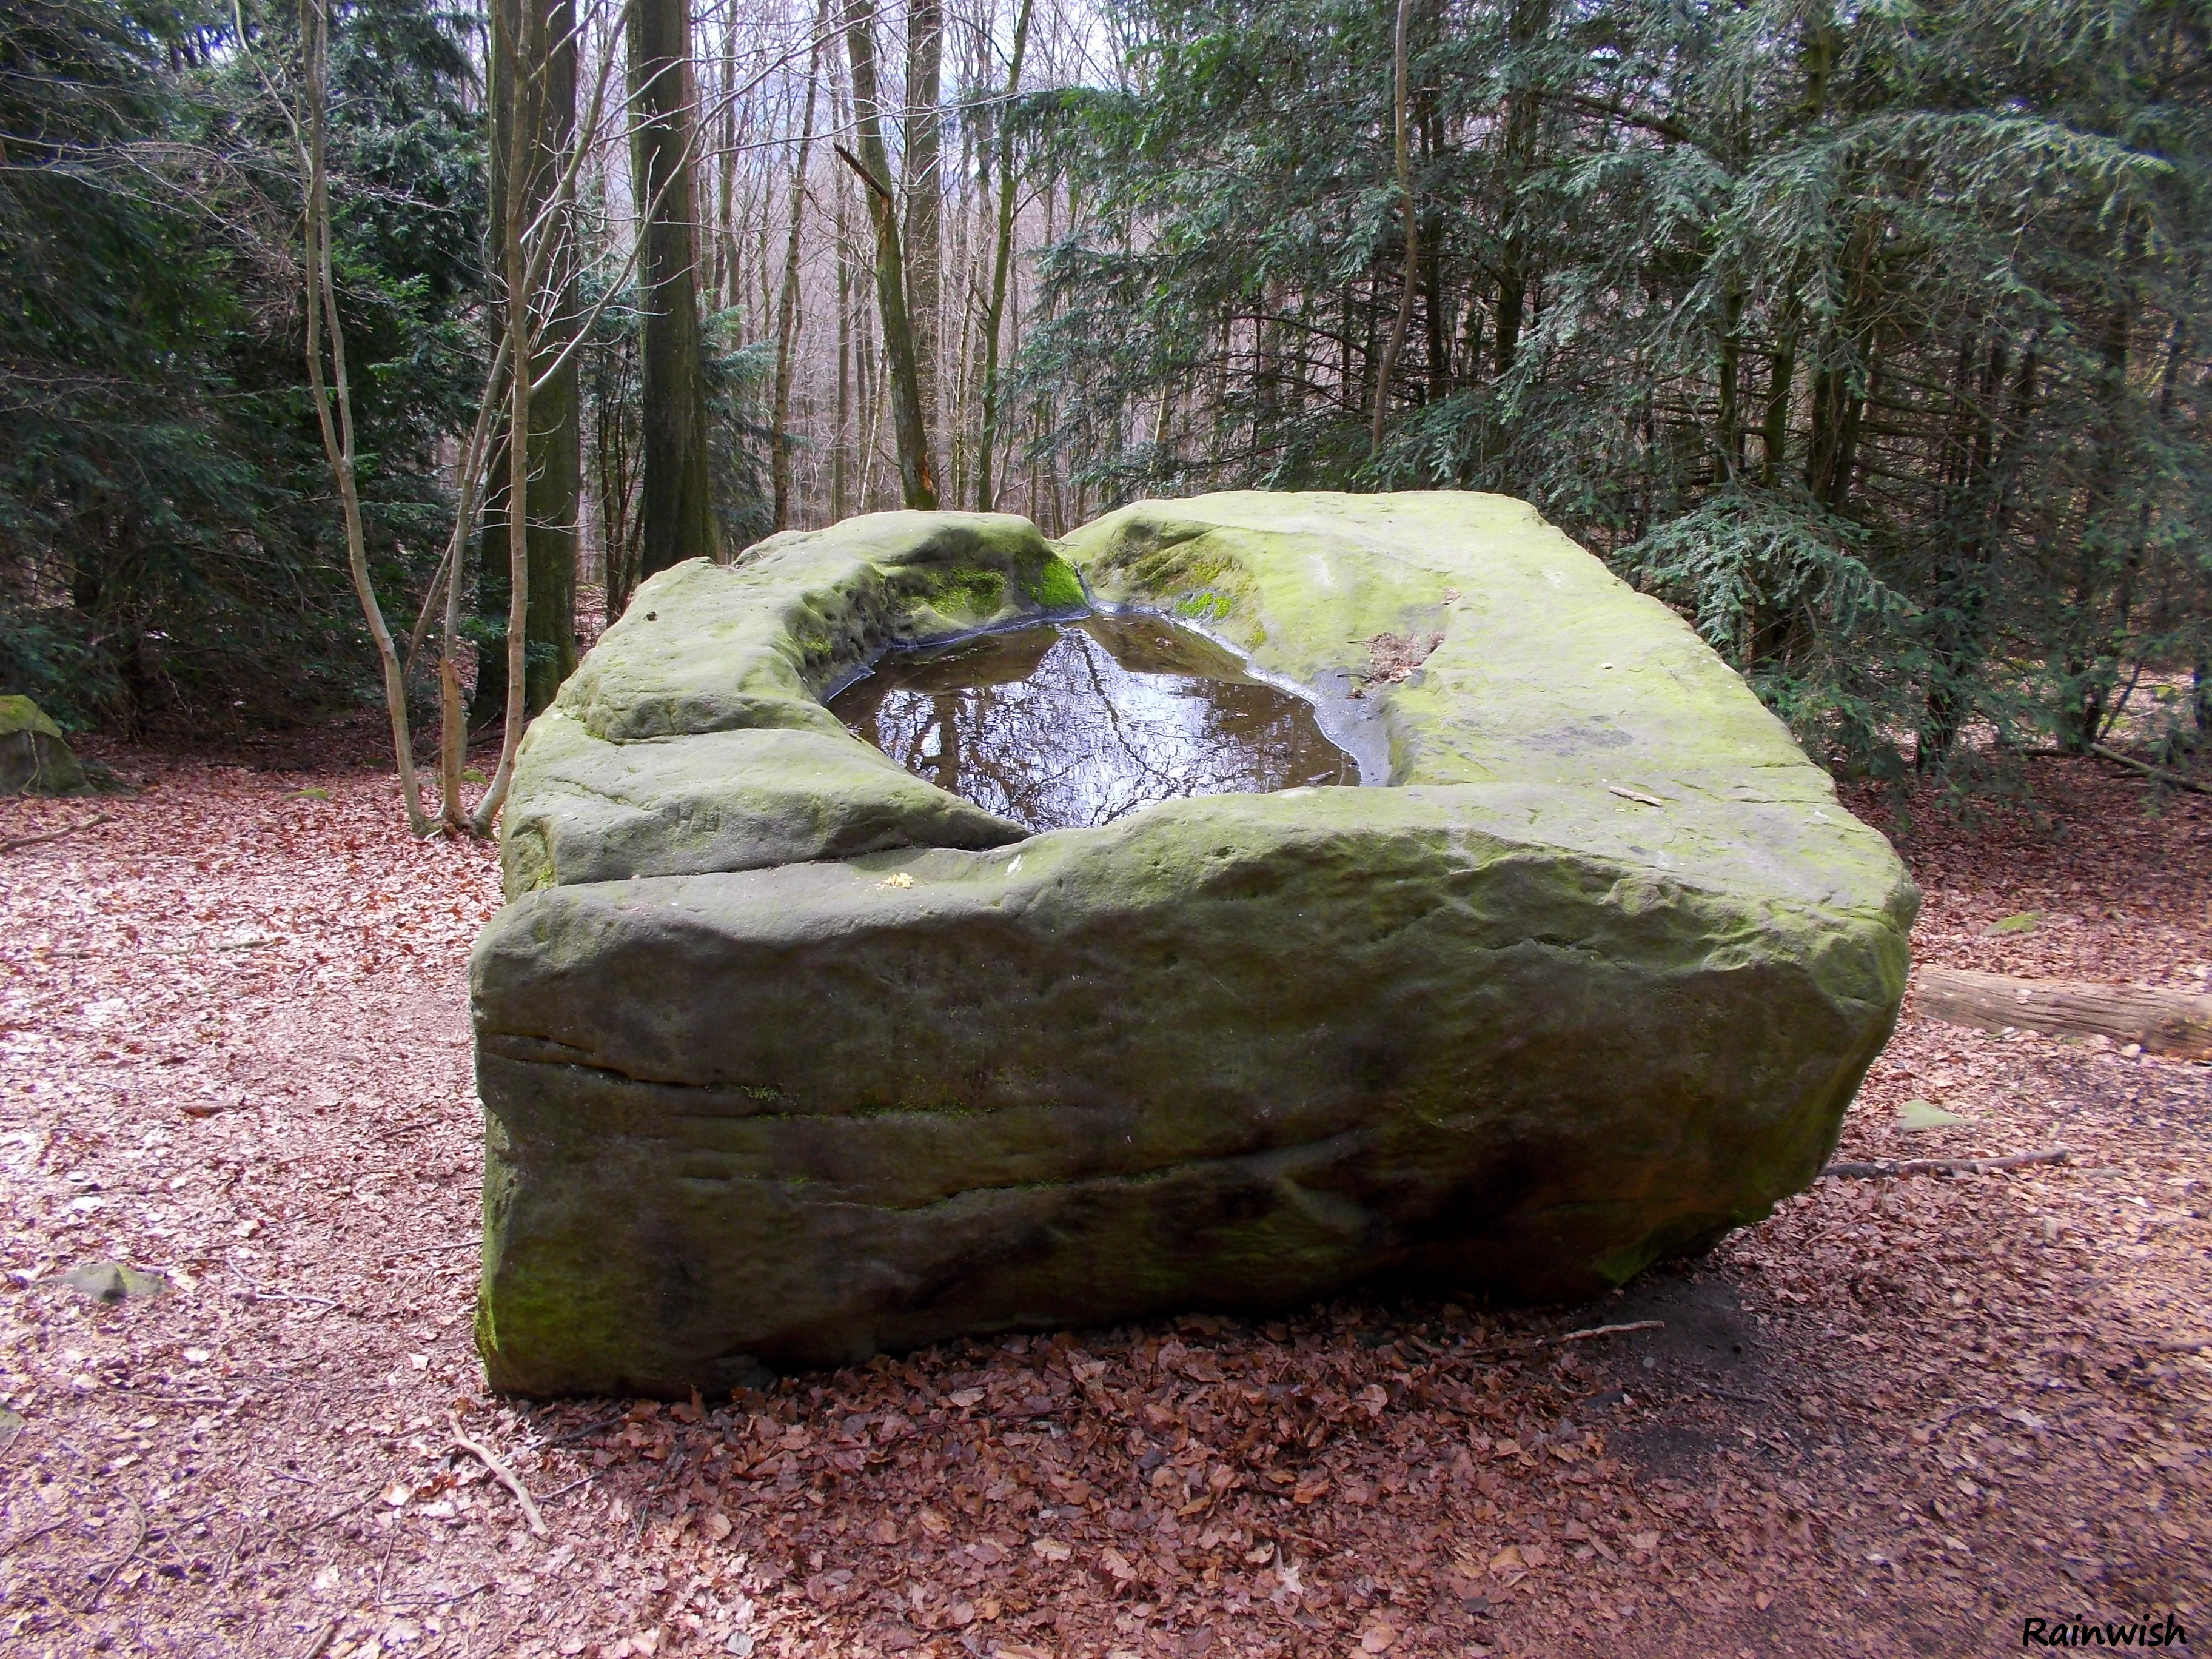 Alte Taufe - an ancient sacrificial altar stone in the Deister ...